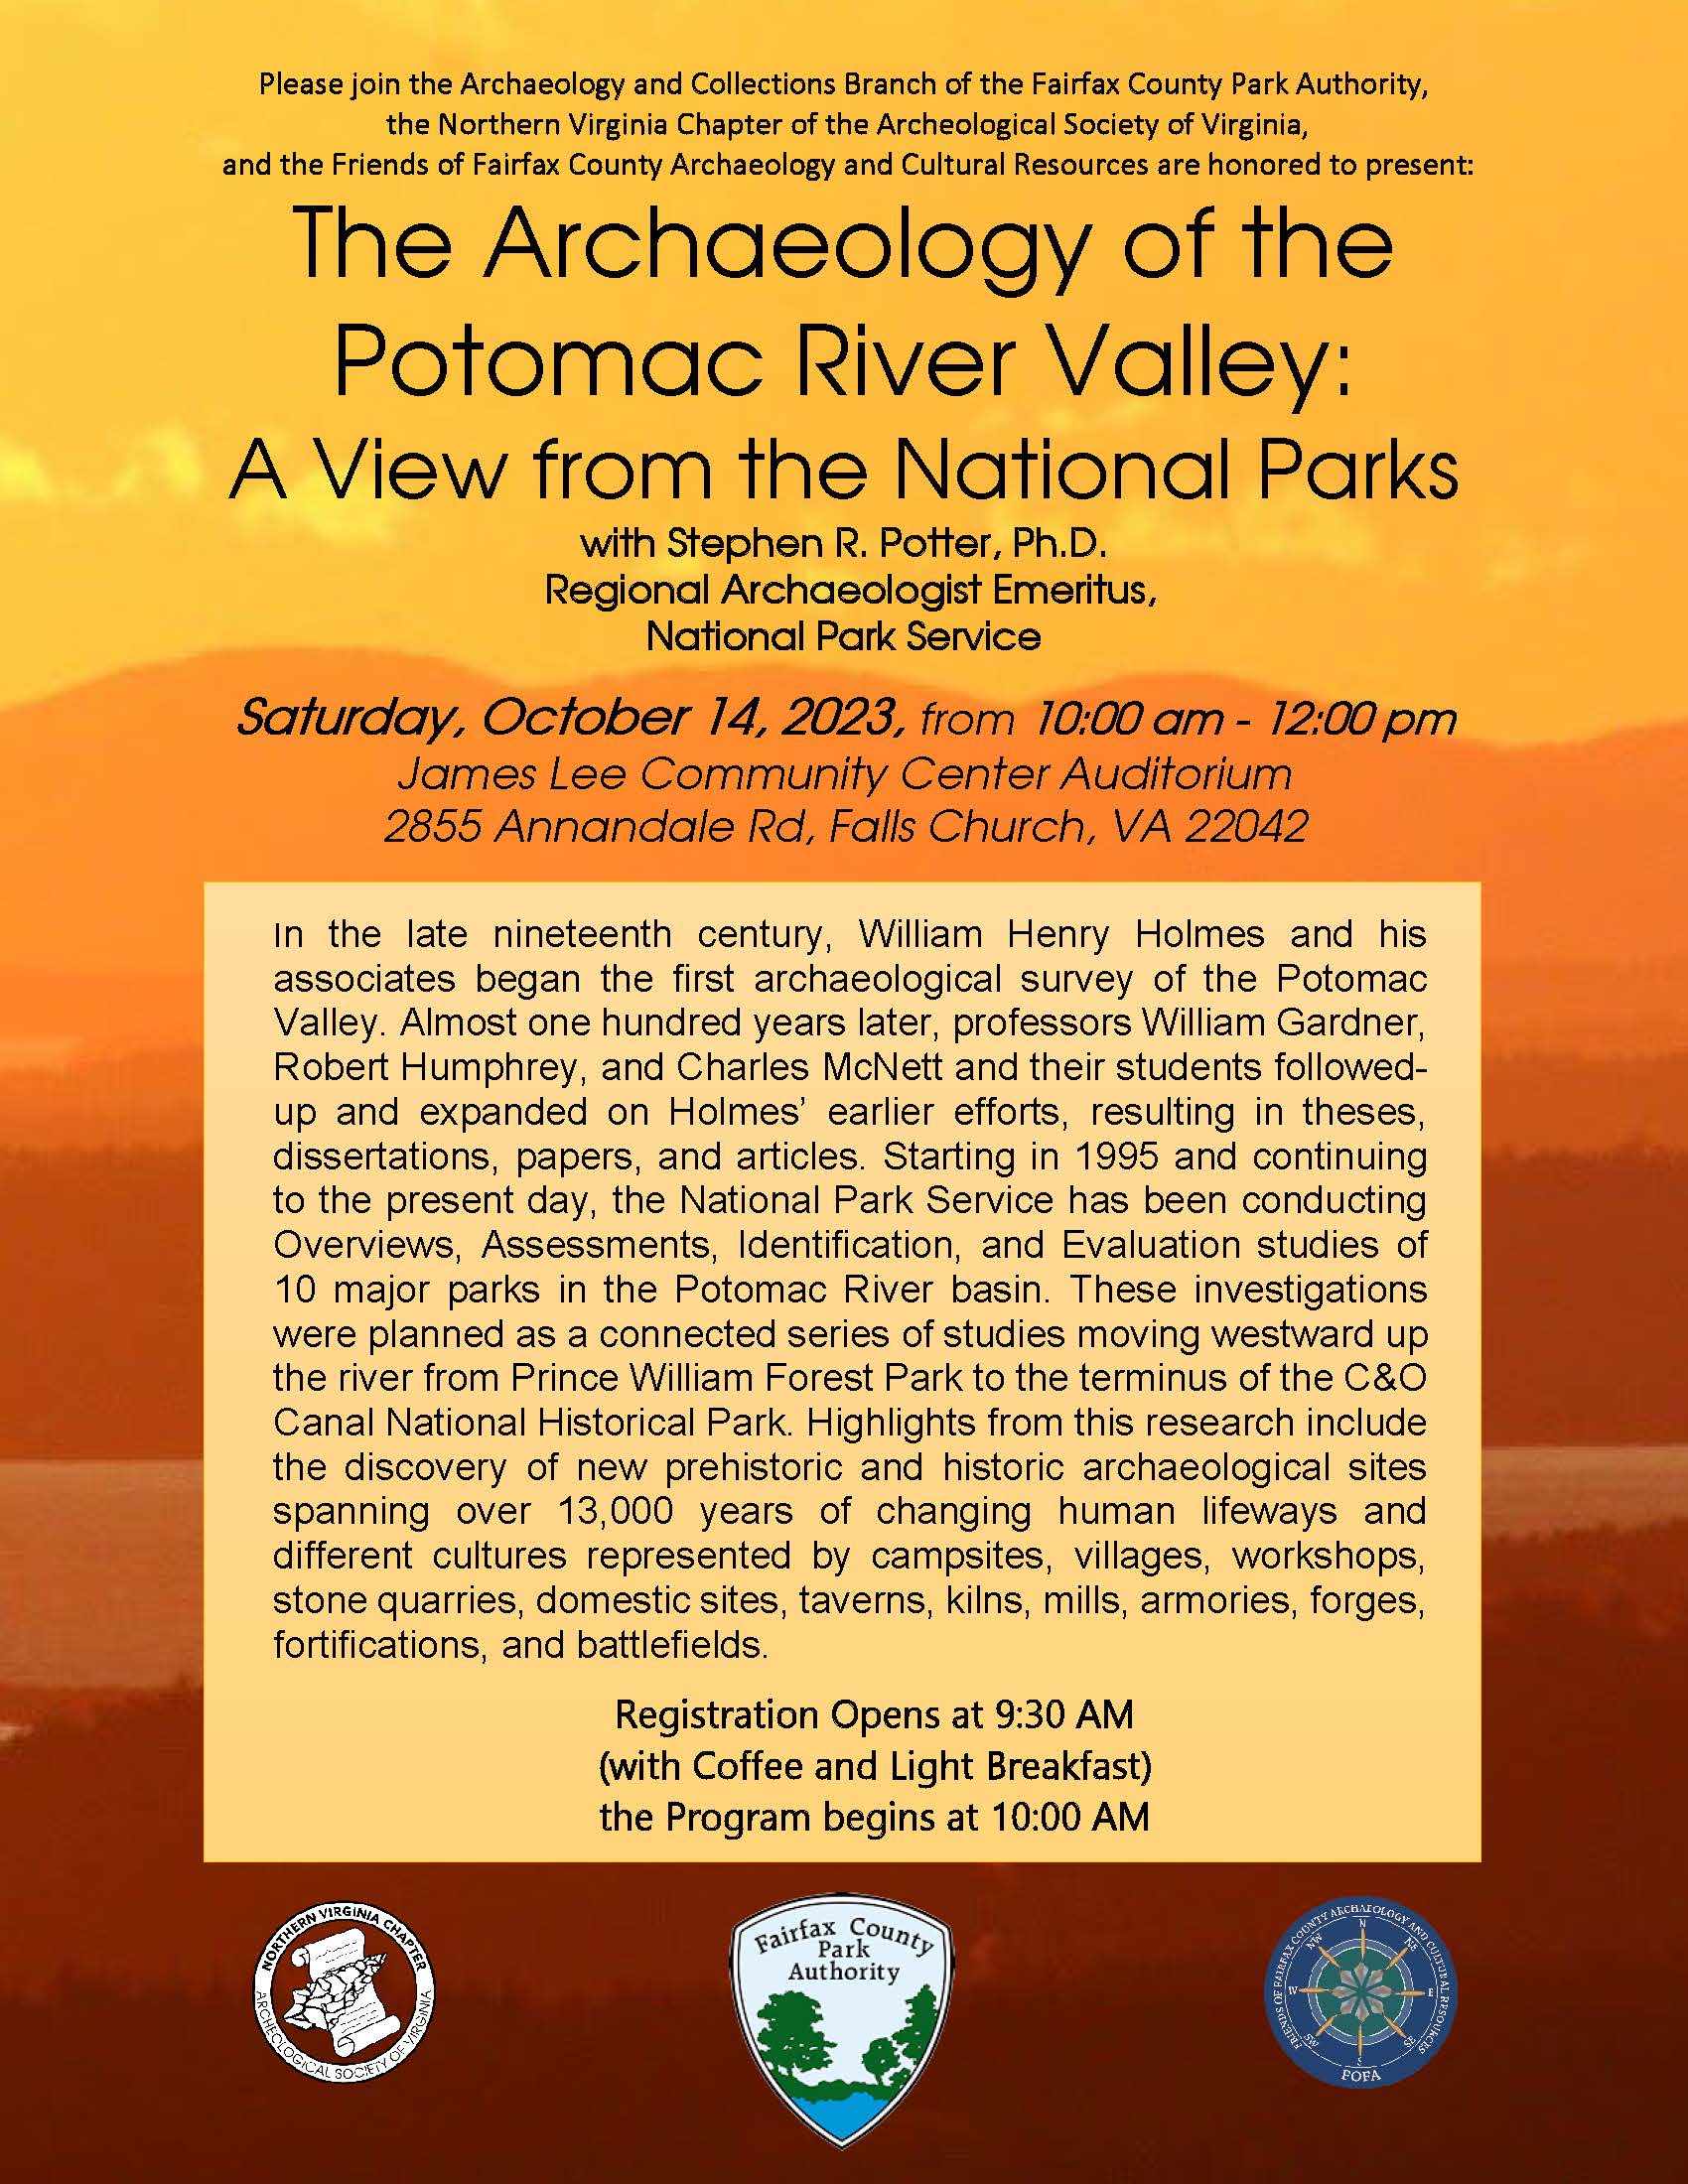 Poster for The Archaeology of the Potomac River Valley